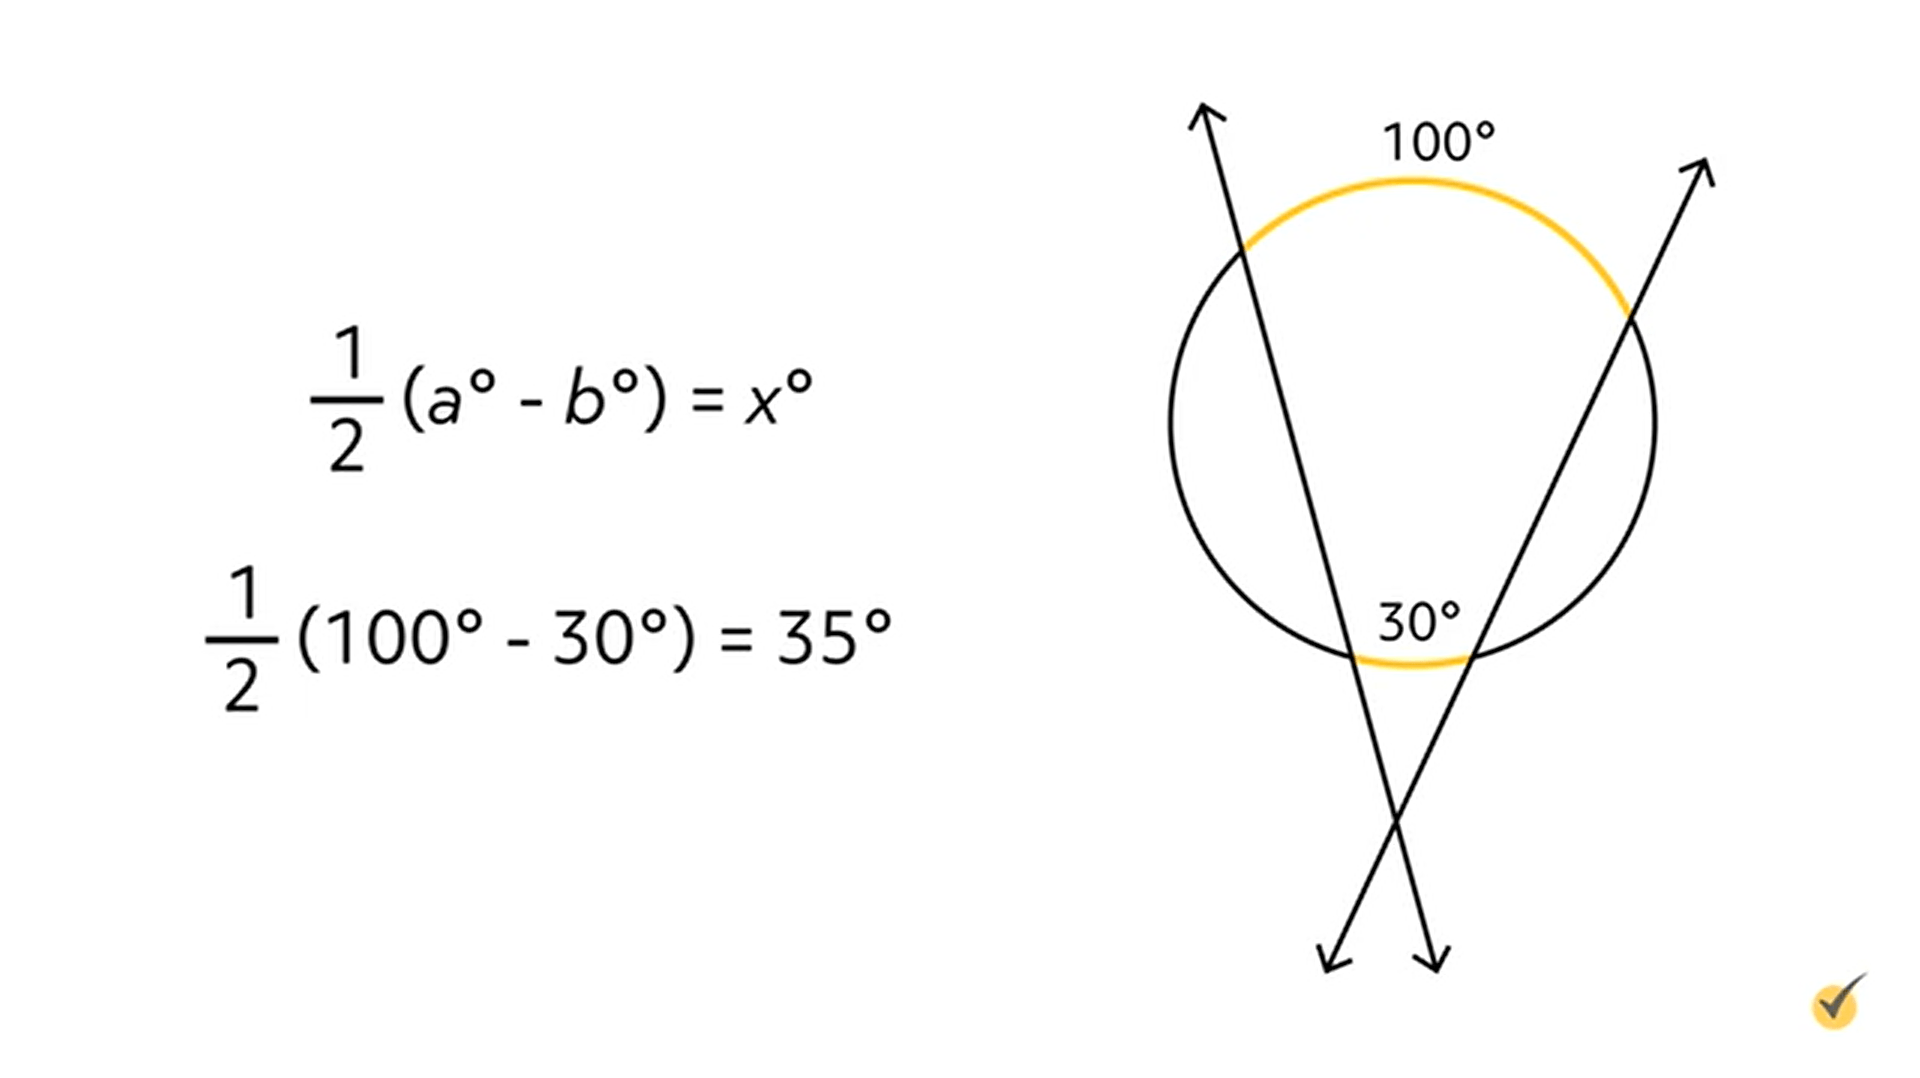 Image of 2 secants with the vertex meeting outside the circle. The first arch is 30 degrees, and the second is 100 degrees.